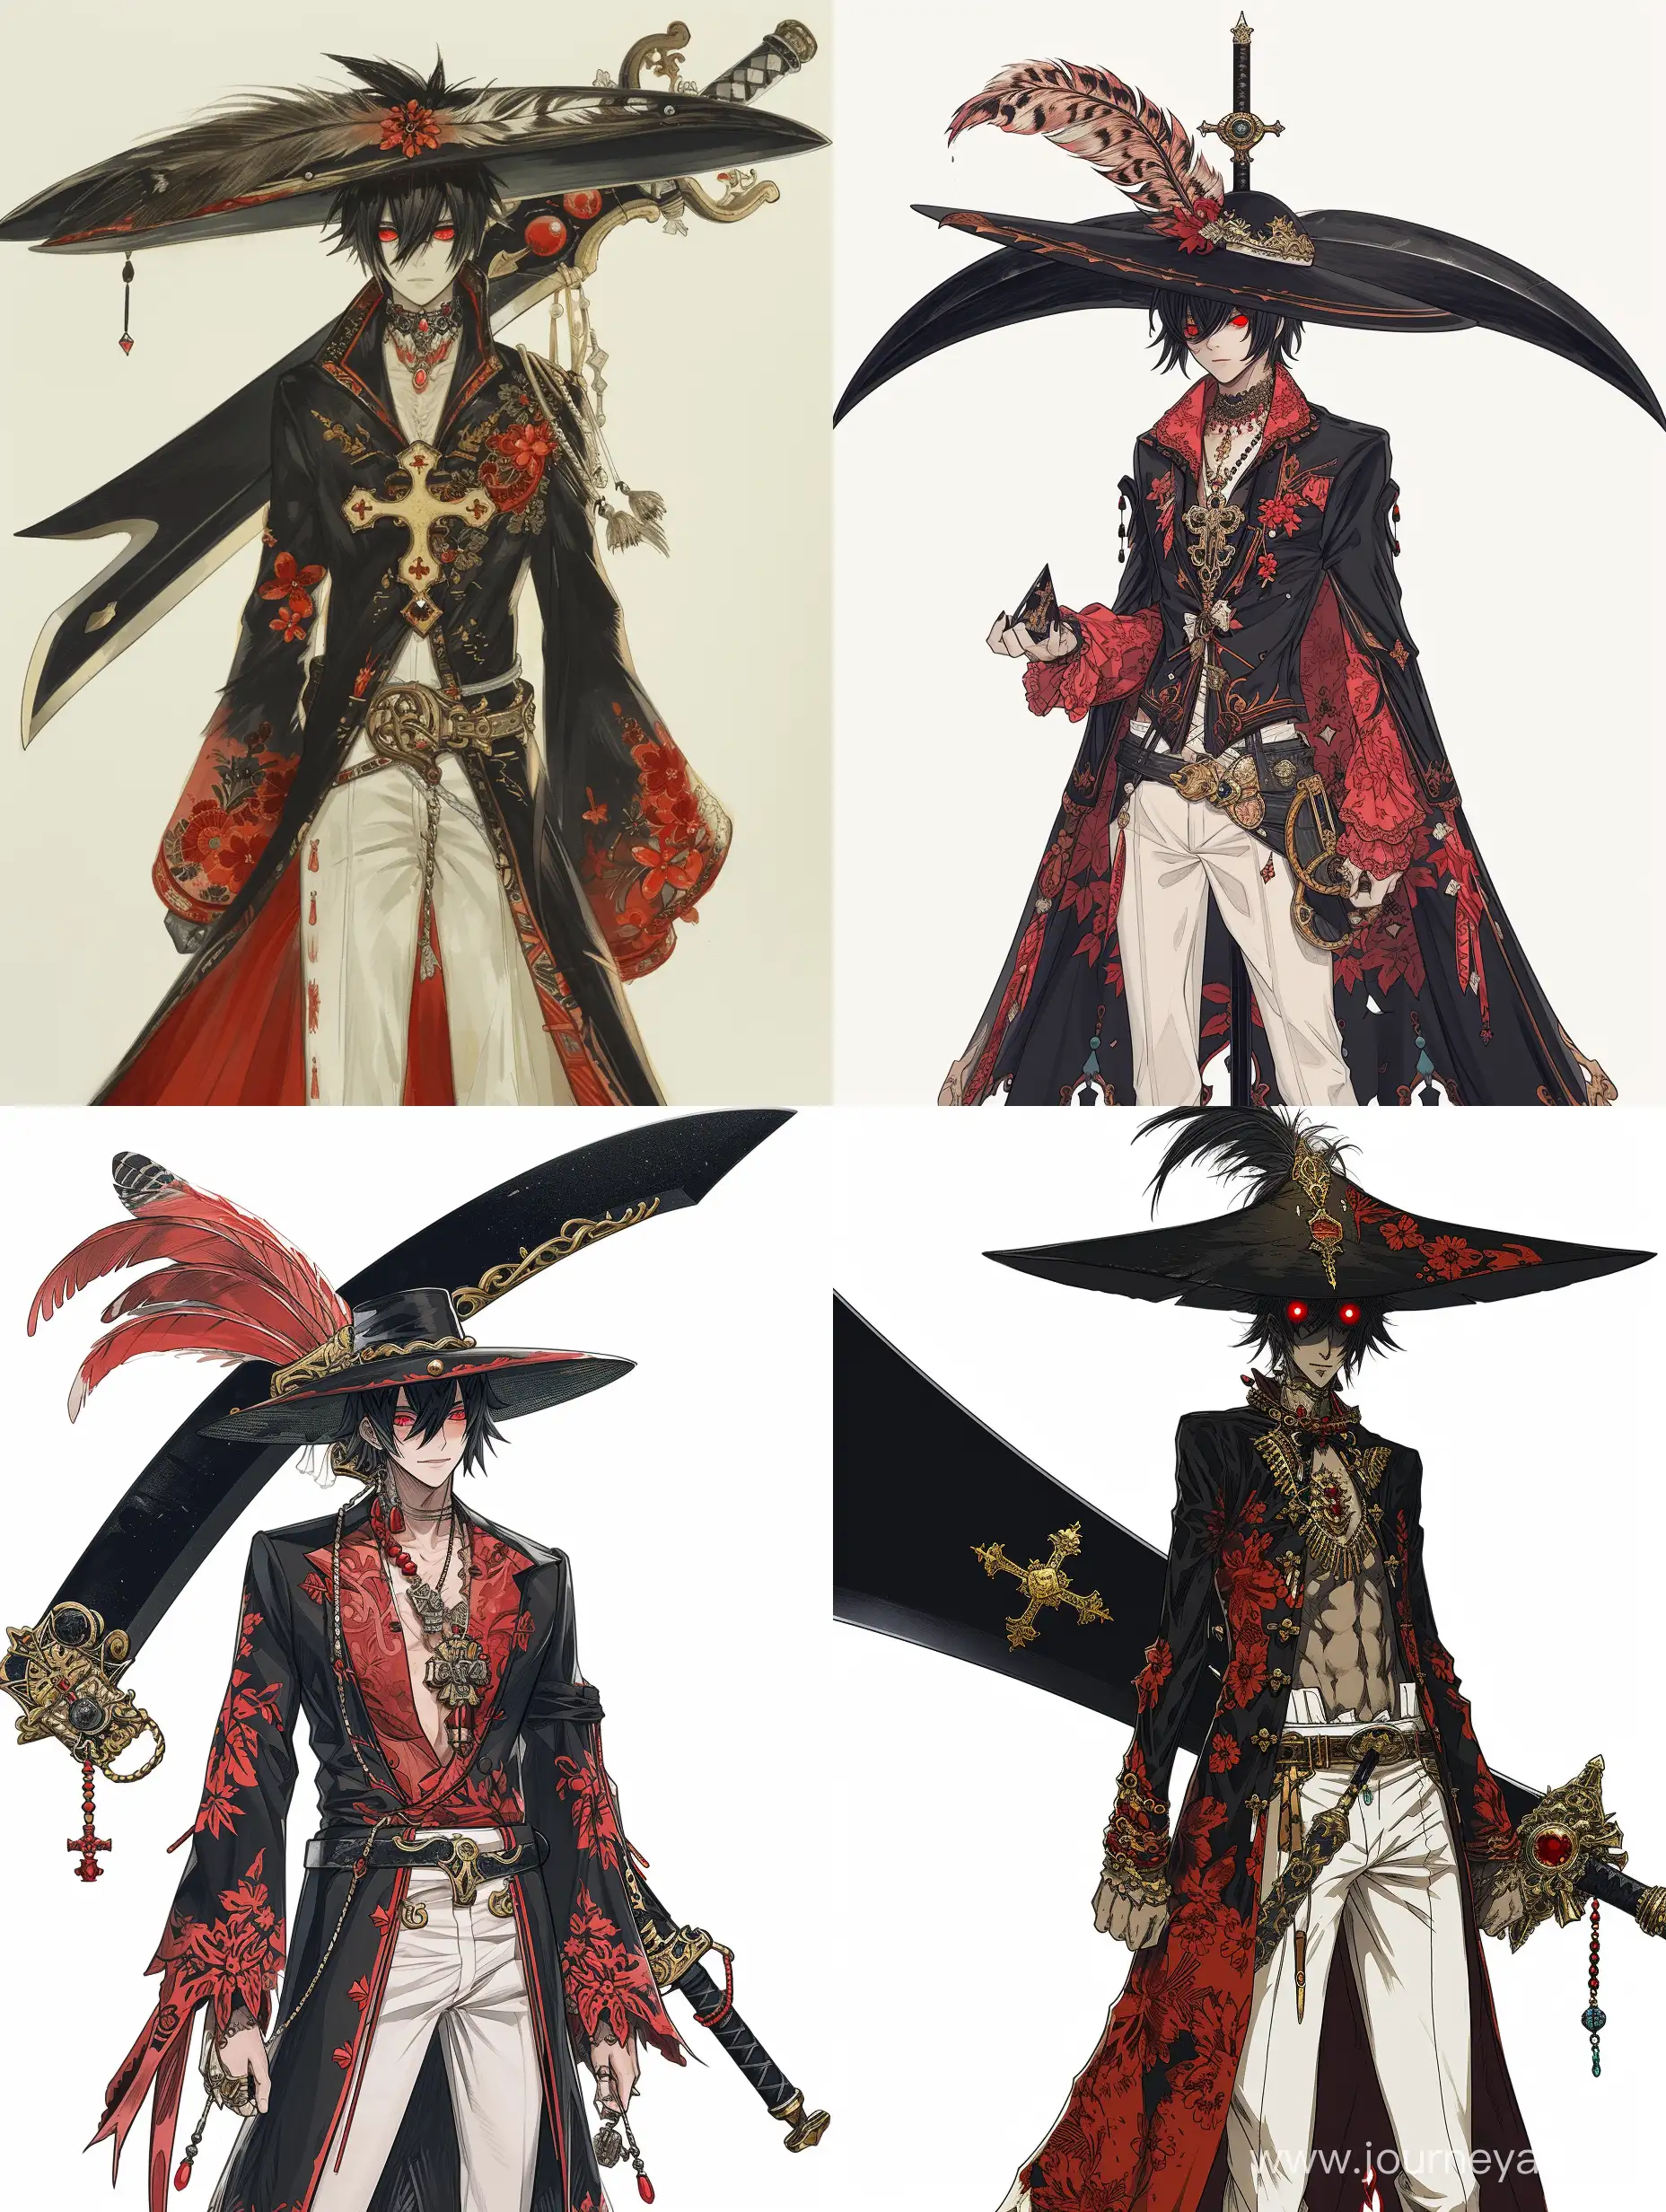 a tall, thin man with black hair, a short beard, mustache and sideburns pointed upwards. He has unusual red eyes, similar to the eyes of a falcon.[
He wears ornate clothes in red and black tones and a cross pendant. His attire consists of a wide-brimmed hat decorated with a large feather and a long open black suit with a red floral pattern on the sleeves and collar. In addition, he wears white trousers held up by a decorative belt and tucked into boots.
Behind his back there is a huge black sword with a wide curved blade. The sword itself is also shaped like a cross. The gold guard is inlaid with red beads, the handle is wrapped in bandages, and there is a particularly large stone at the end.